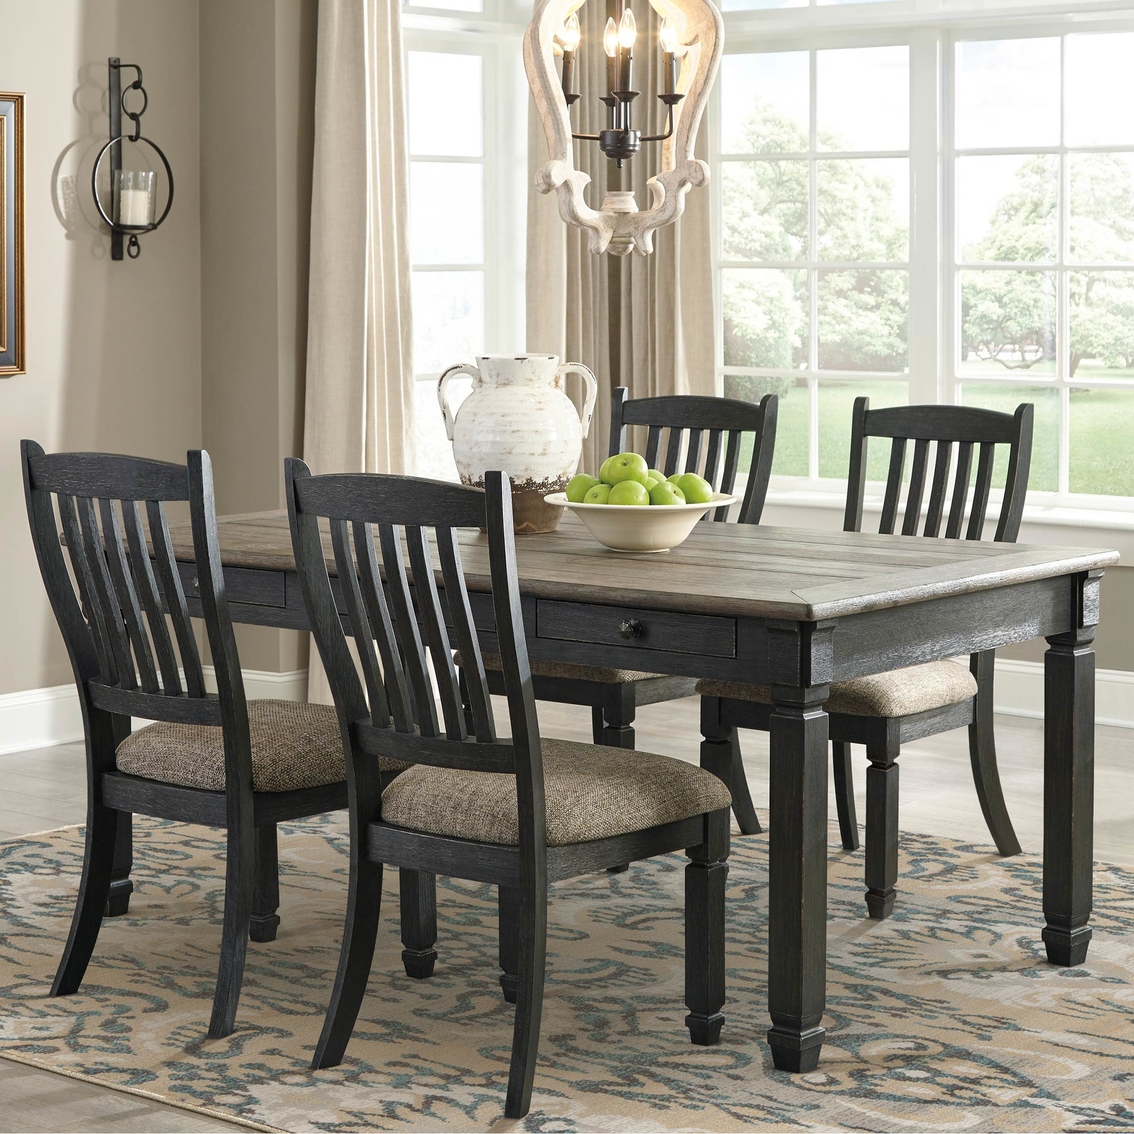 Signature Design by Ashley Tyler Creek Rectangular Dining Room Table - Image 2 of 3